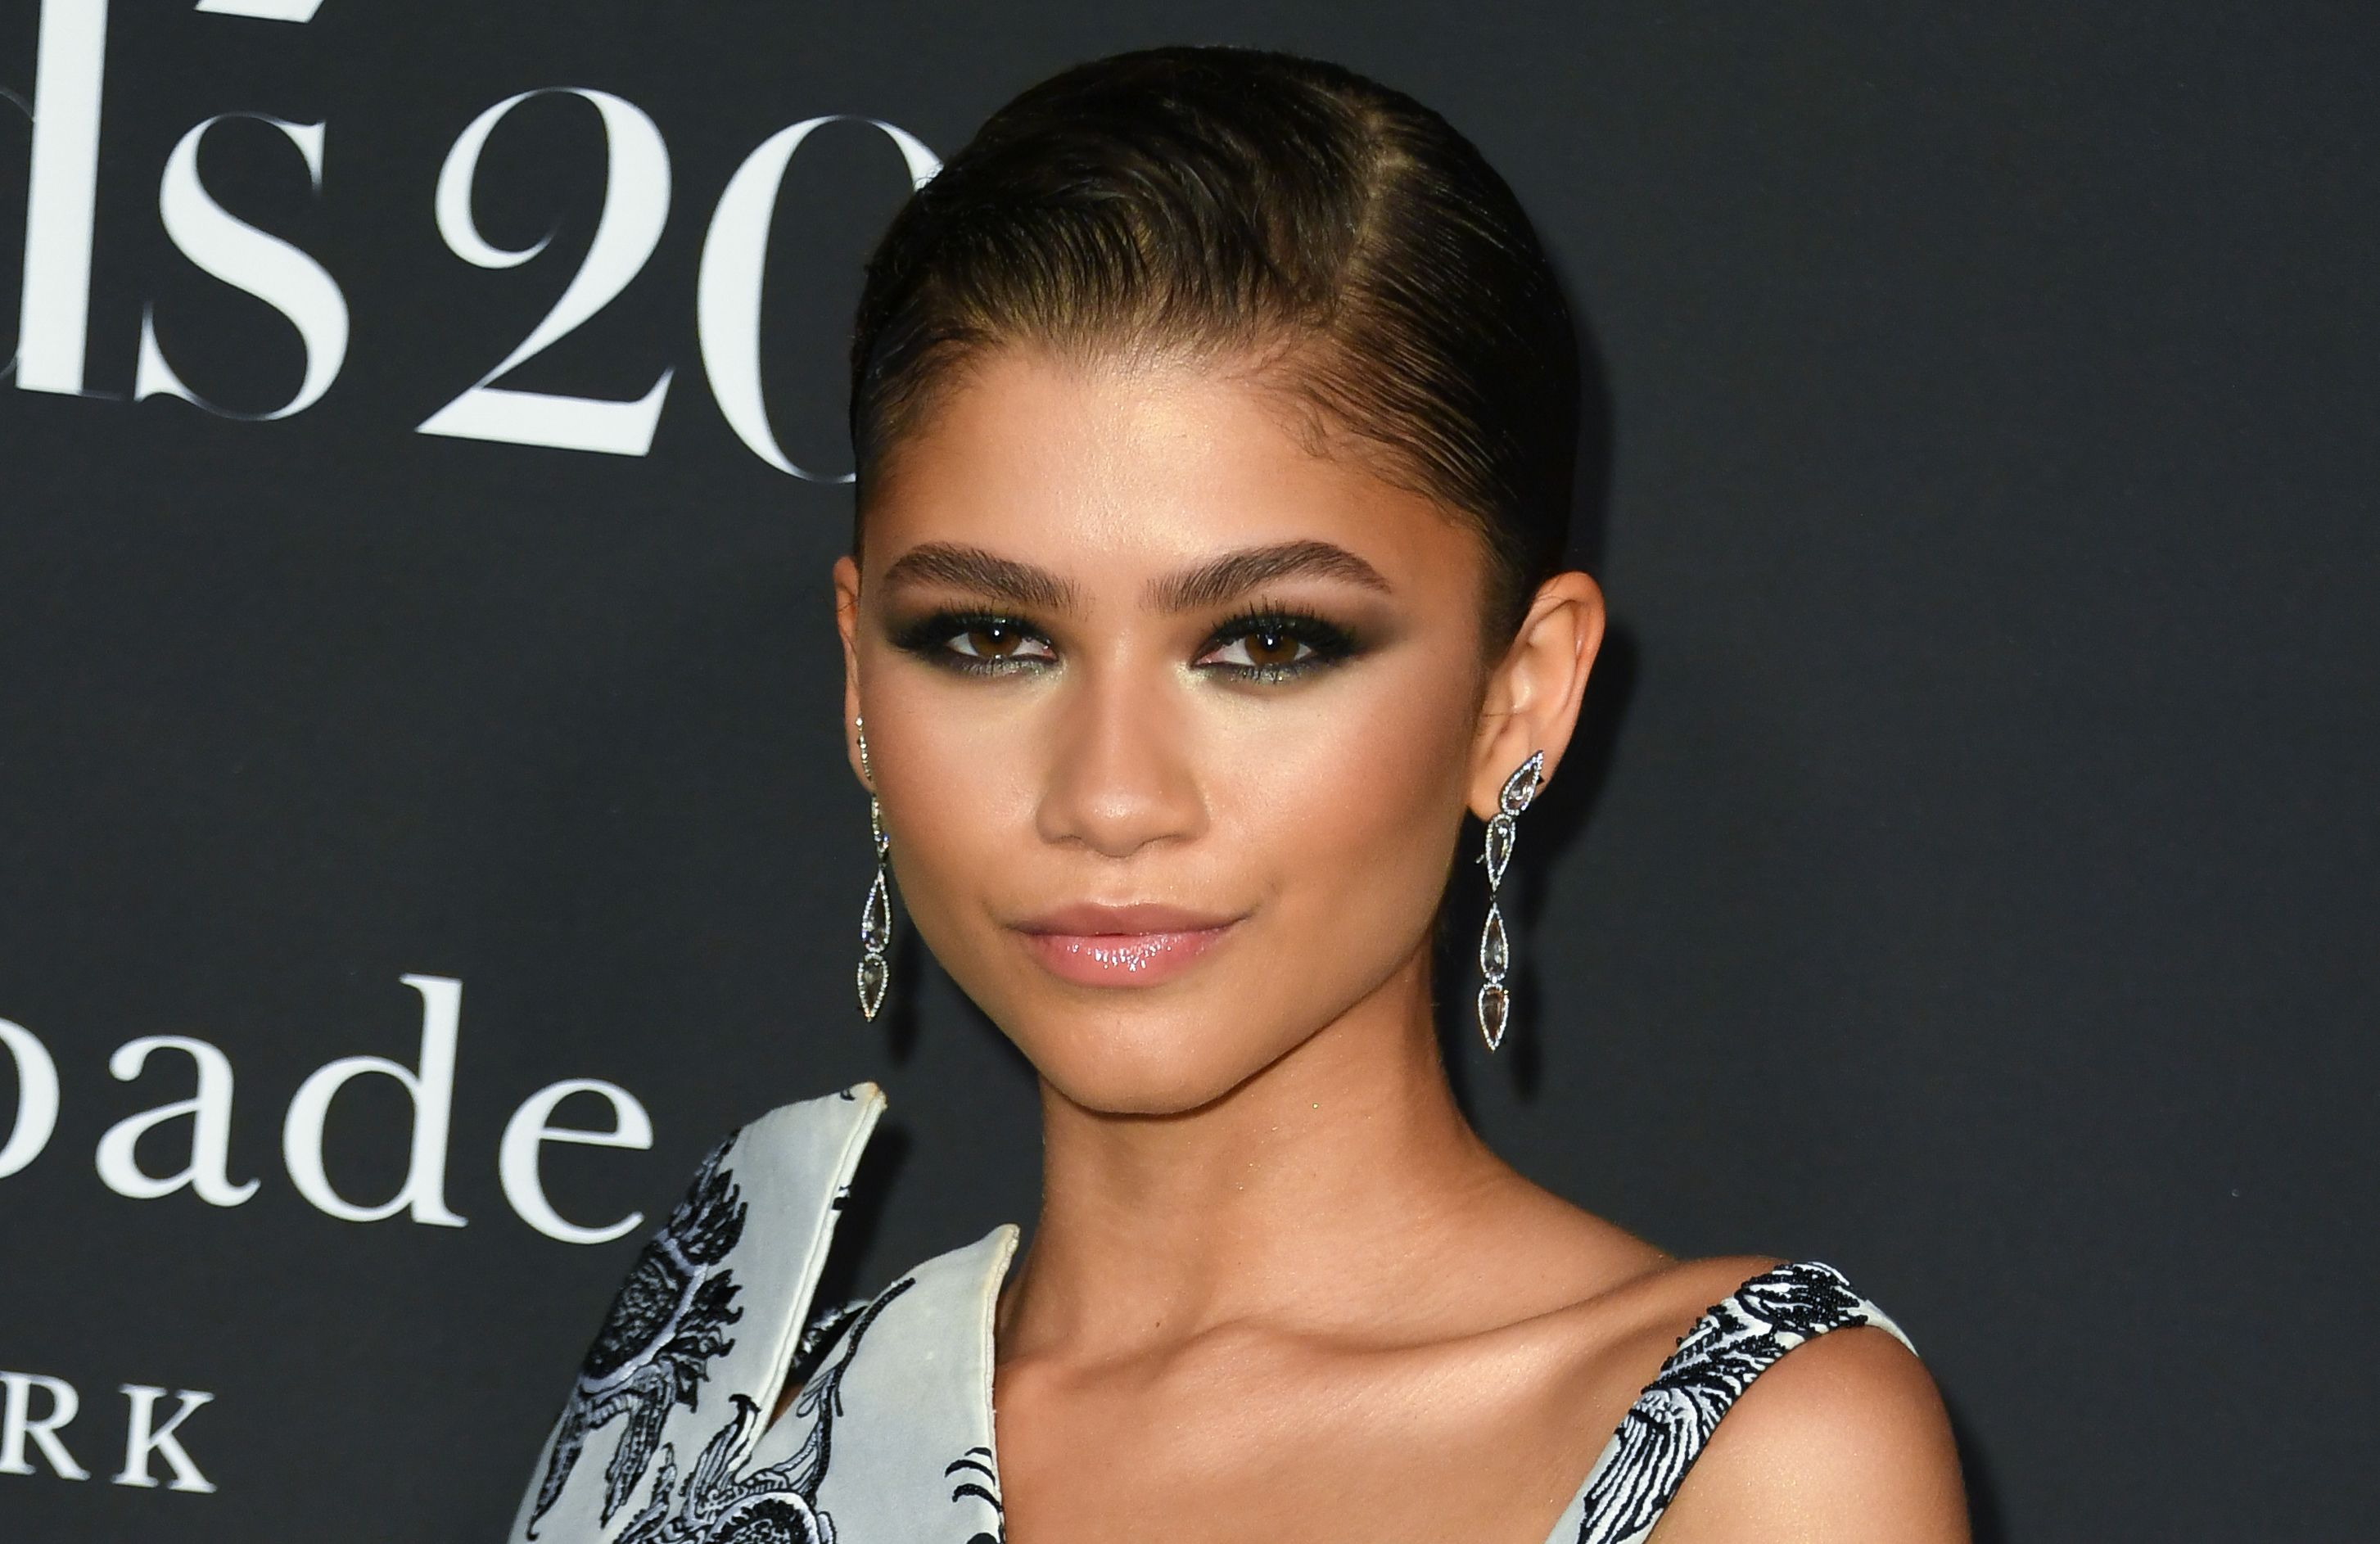 Zendaya arrives for the 5th Annual InStyle Awards in Los Angeles on October 21, 2019.